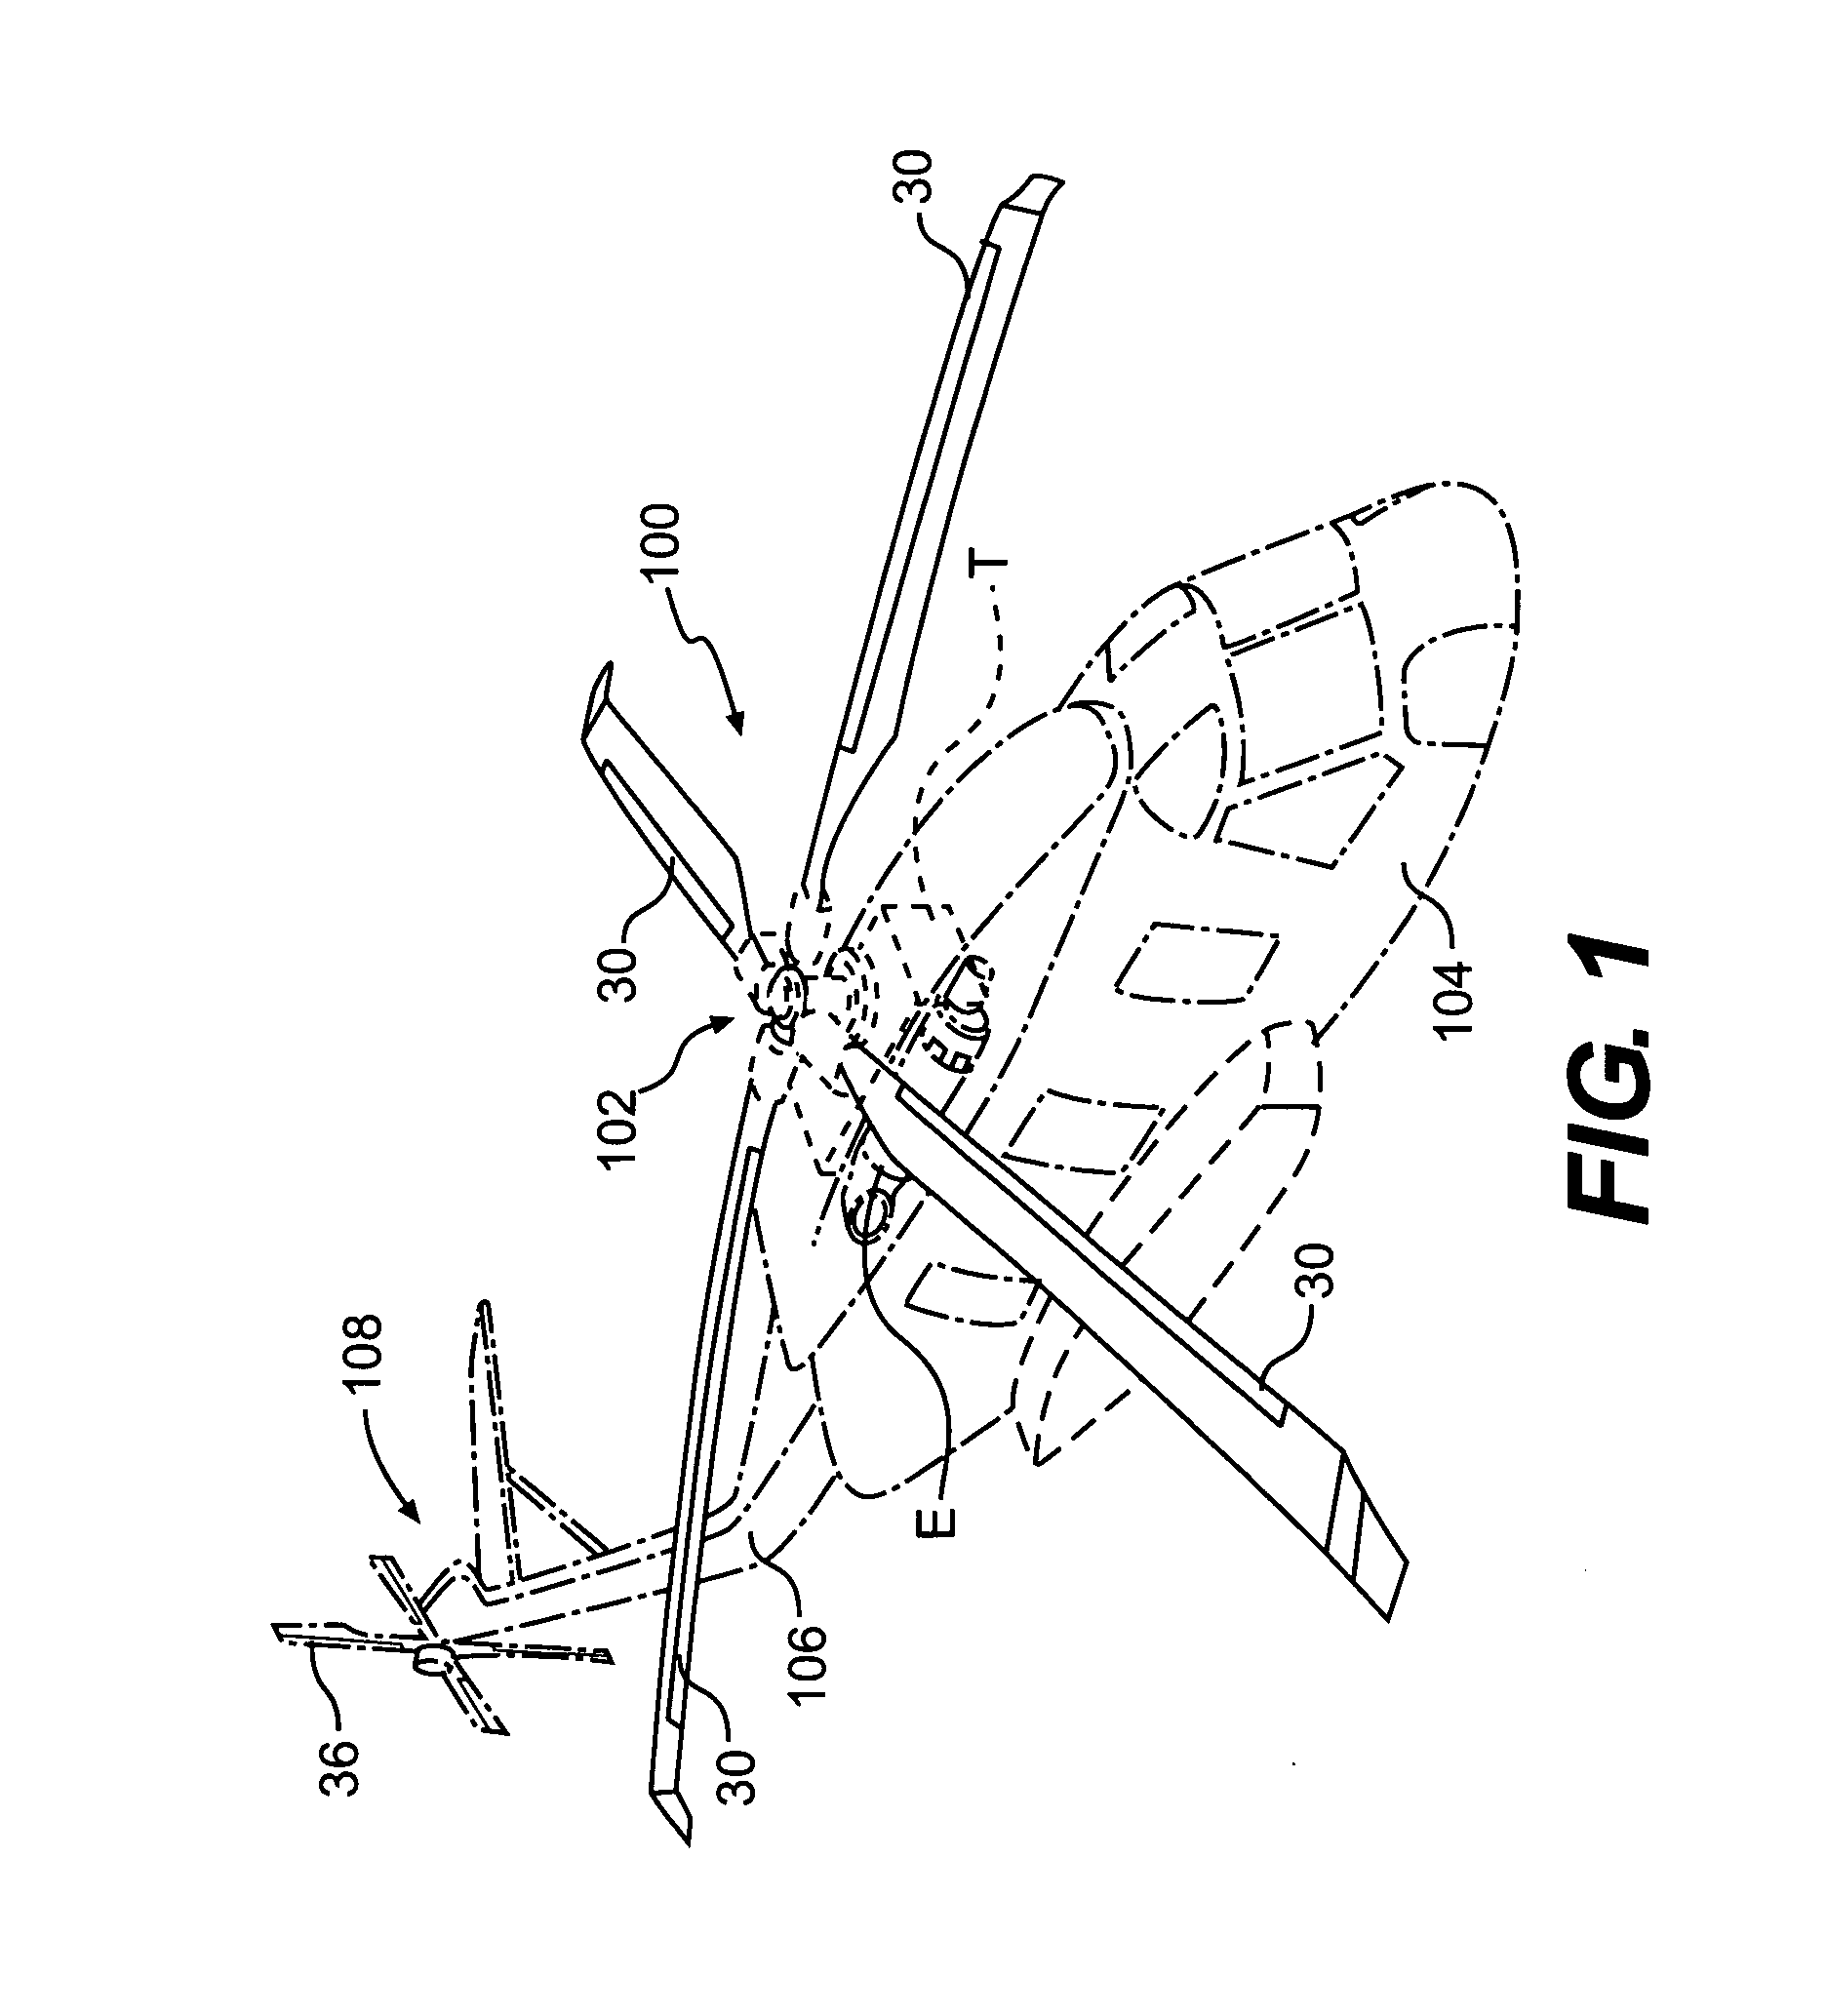 Dual-channel deicing system for a rotary wing aircraft